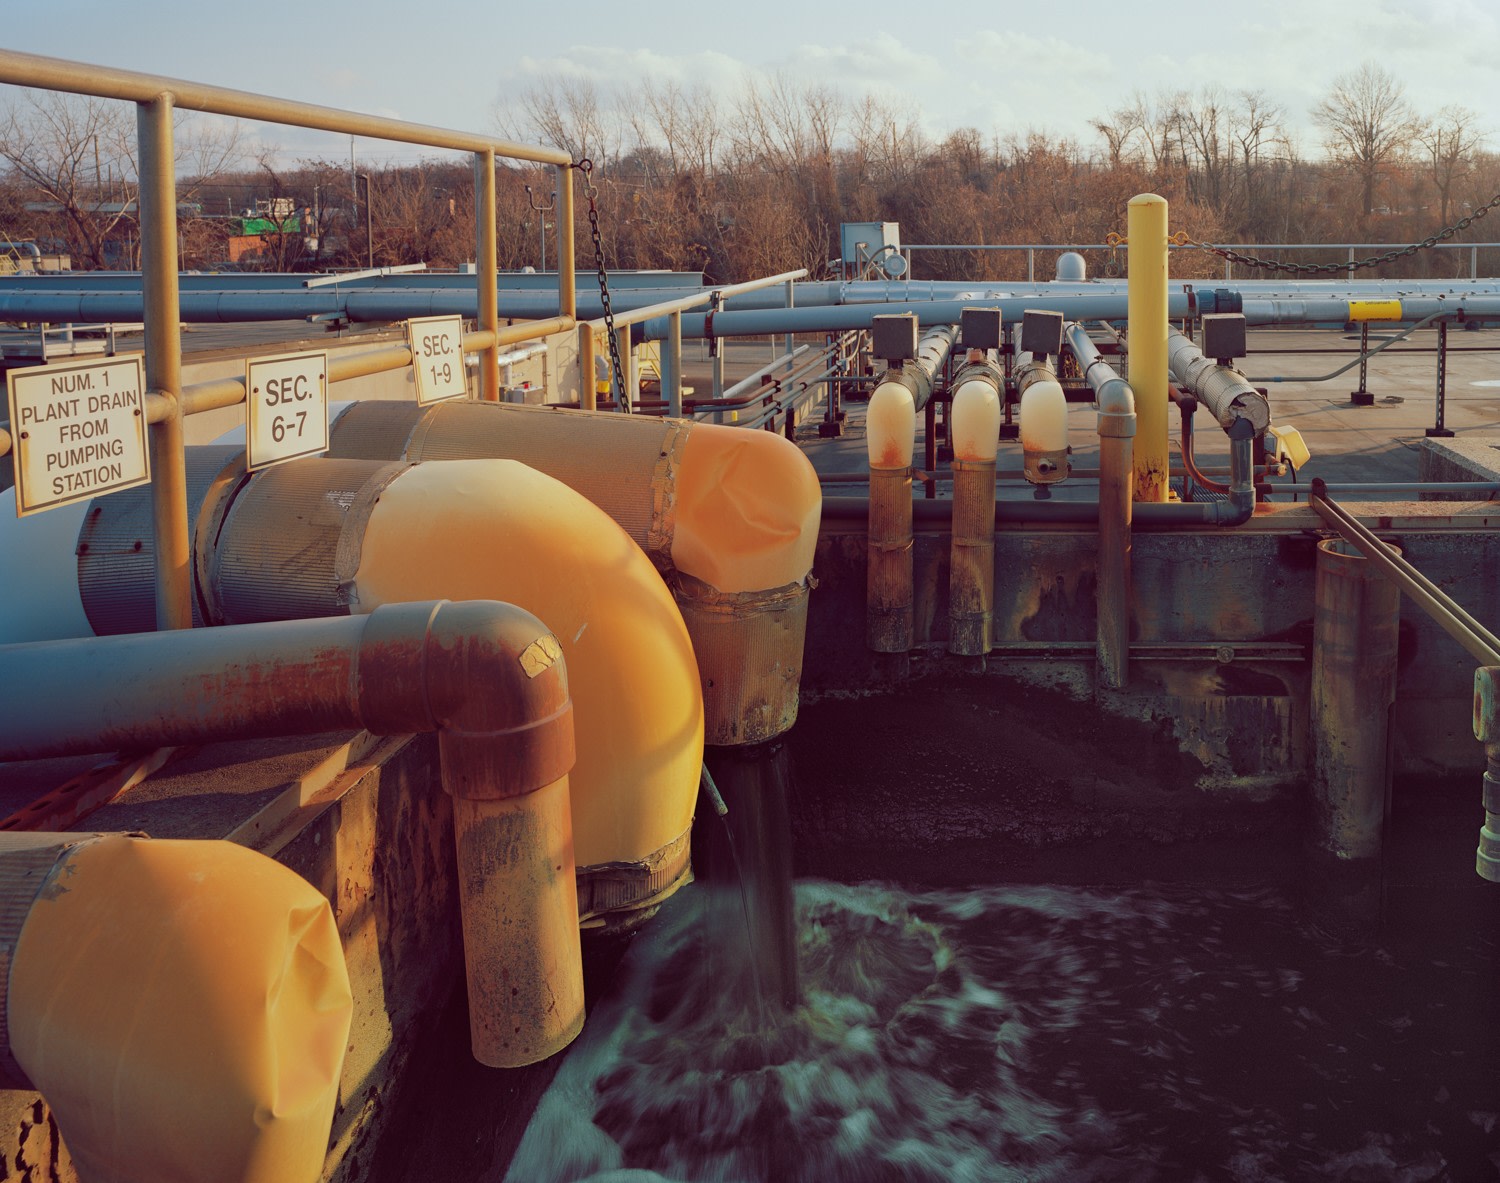 Influent, Sec. 6-7, 1-9, Photograph of a water treatment plant, water selling from orange pipes, grey and orange handrails, numerical signs